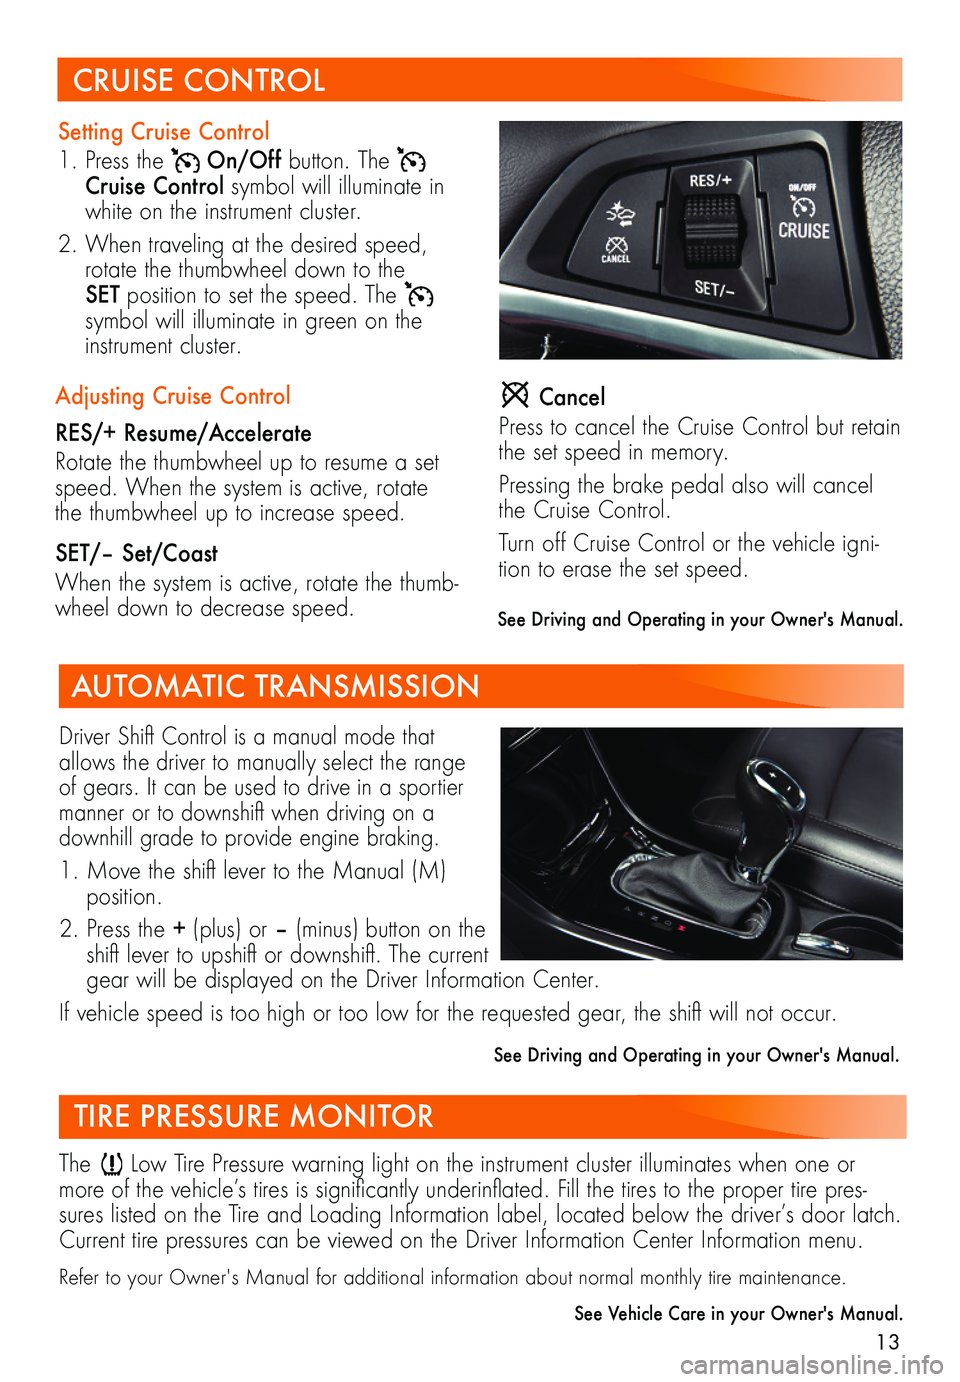 BUICK ENCORE GX 2021  Get To Know Guide 13
Driver	Shift	Control	 is	a	manual	 mode	that	allows the driver to manually select the range of gears. It can be used to drive in a sportier manner	 or	to	downshift	 when	driving	 on	a	downhill grad